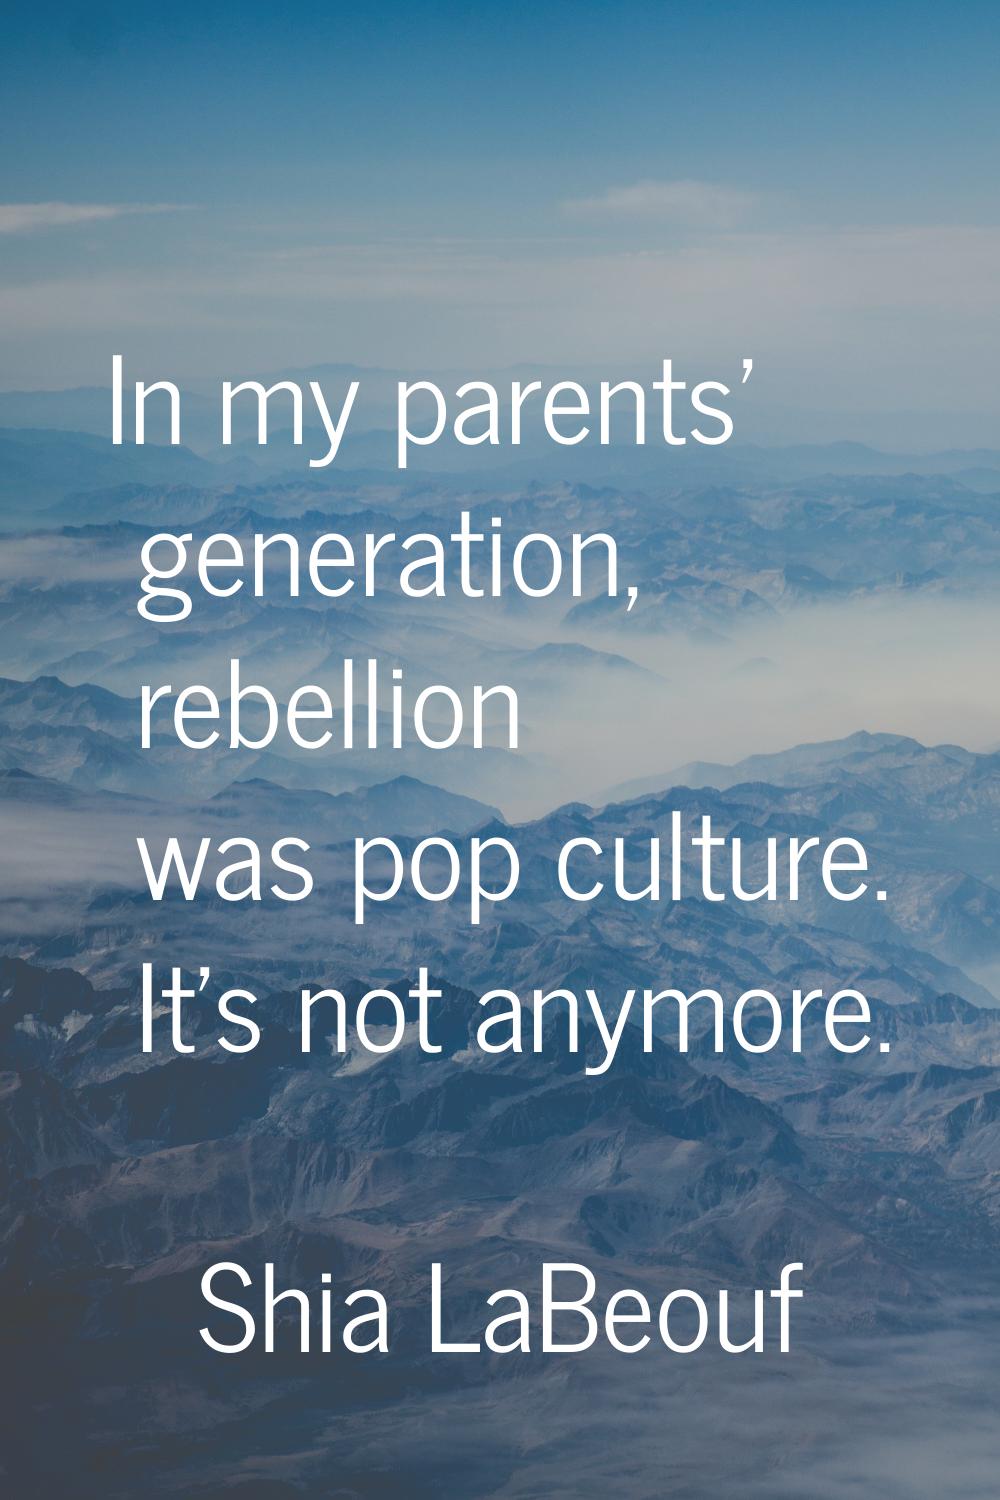 In my parents' generation, rebellion was pop culture. It's not anymore.